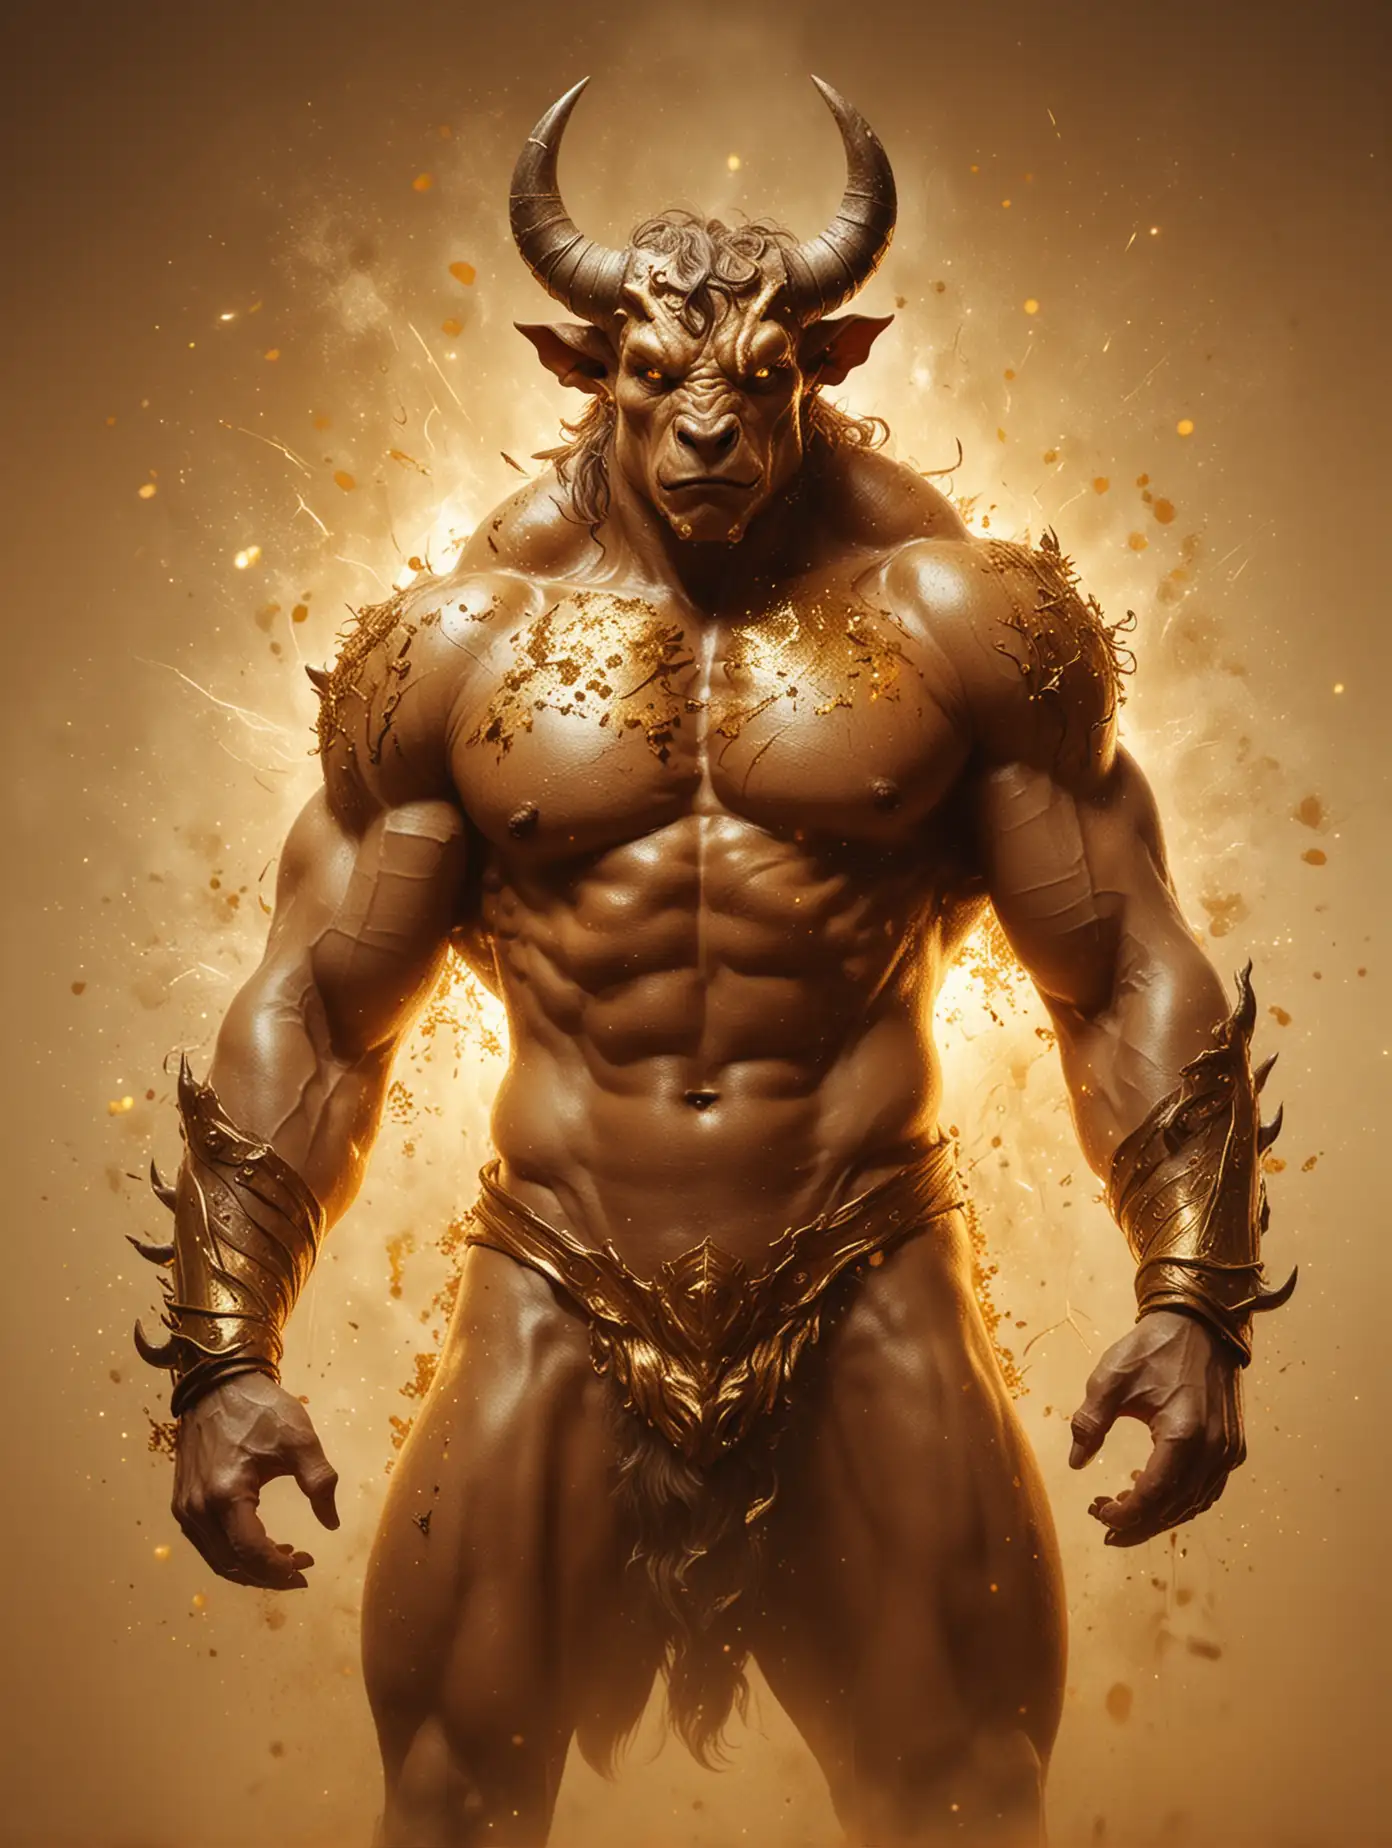 Realistic Illustration of a Muscular Minotaur with Golden Double Exposure